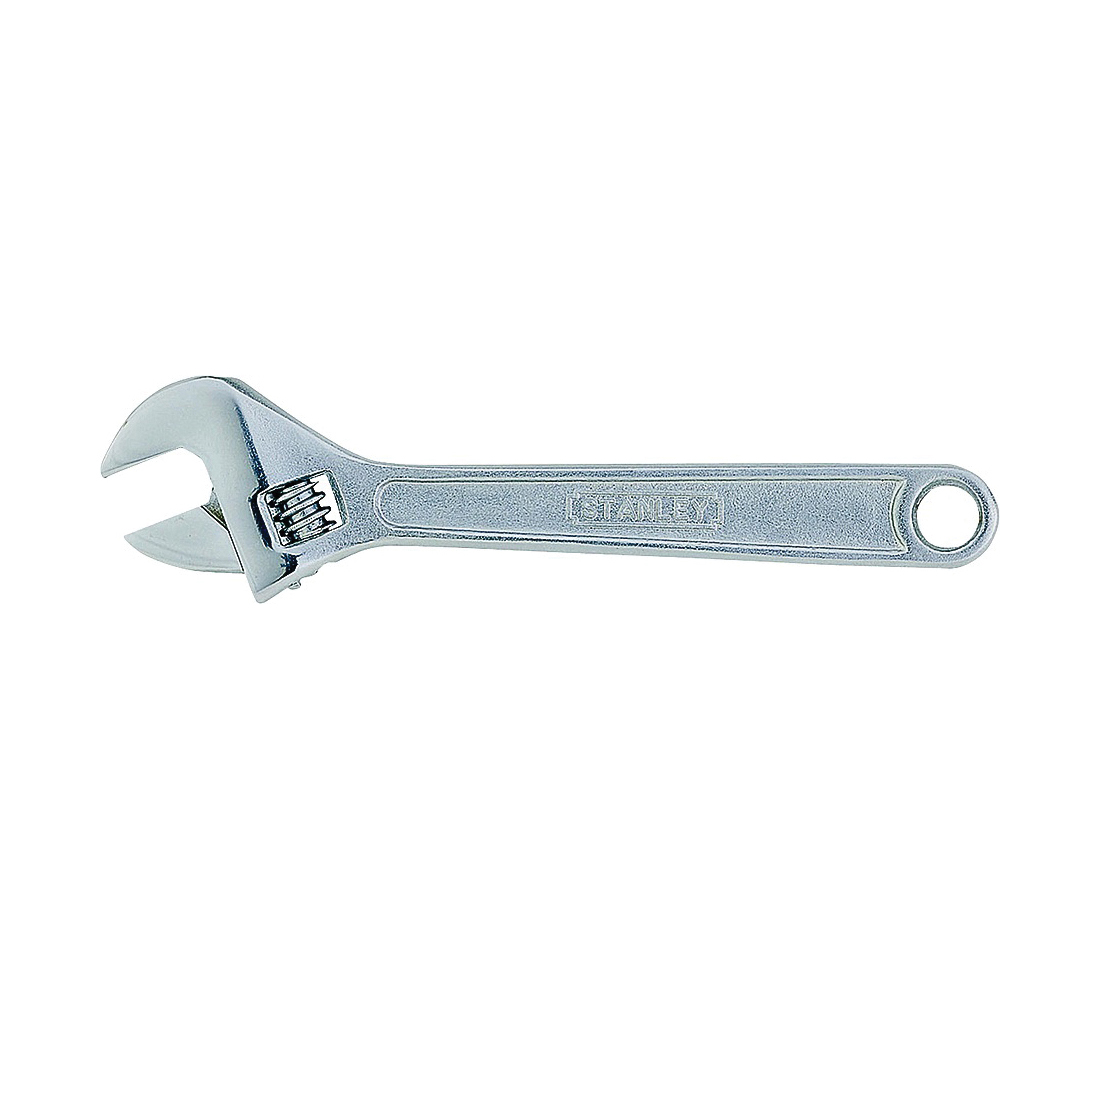 Stanley 87-473 Adjustable Wrench, 12 in OAL, 1-3/8 in Jaw, Steel, Chrome, Plain-Grip Handle